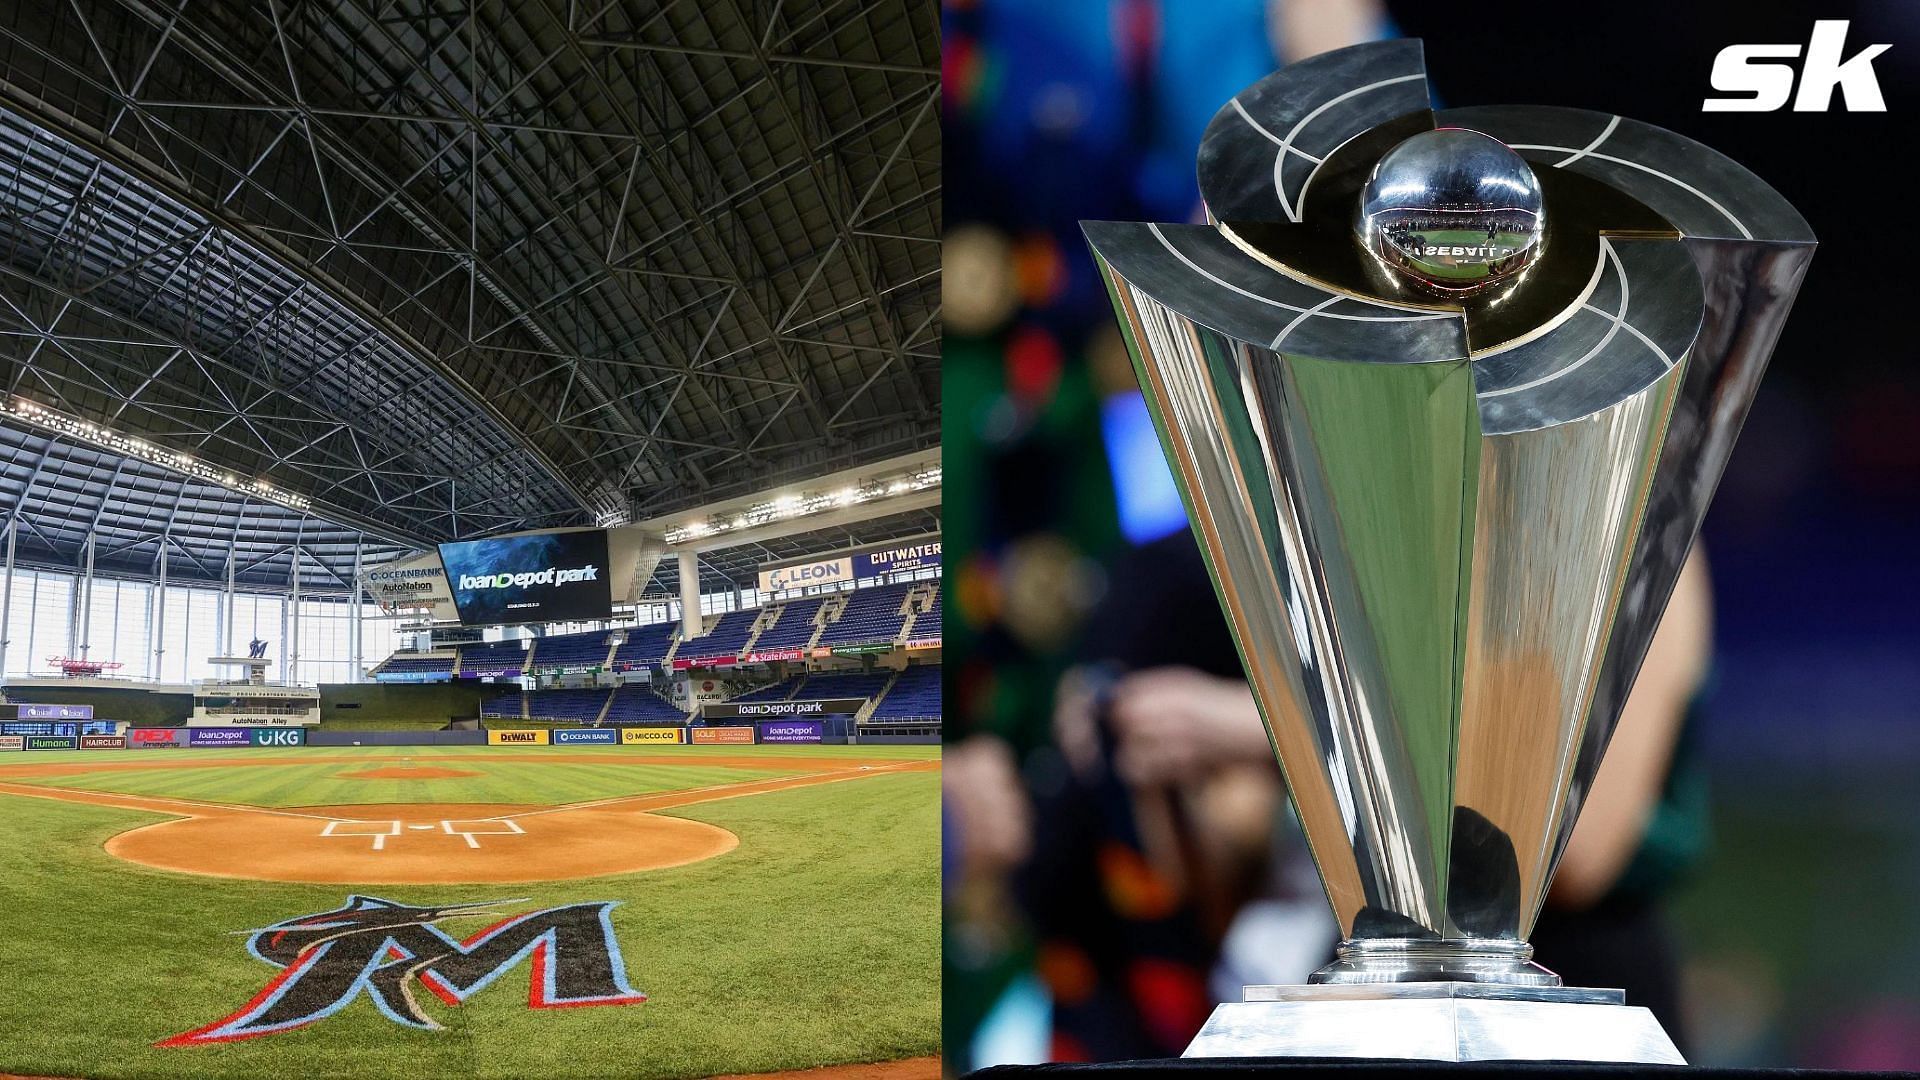 LoanDepot Park in Miami will serve as one of the venues for the 2026 World Baseball Classic